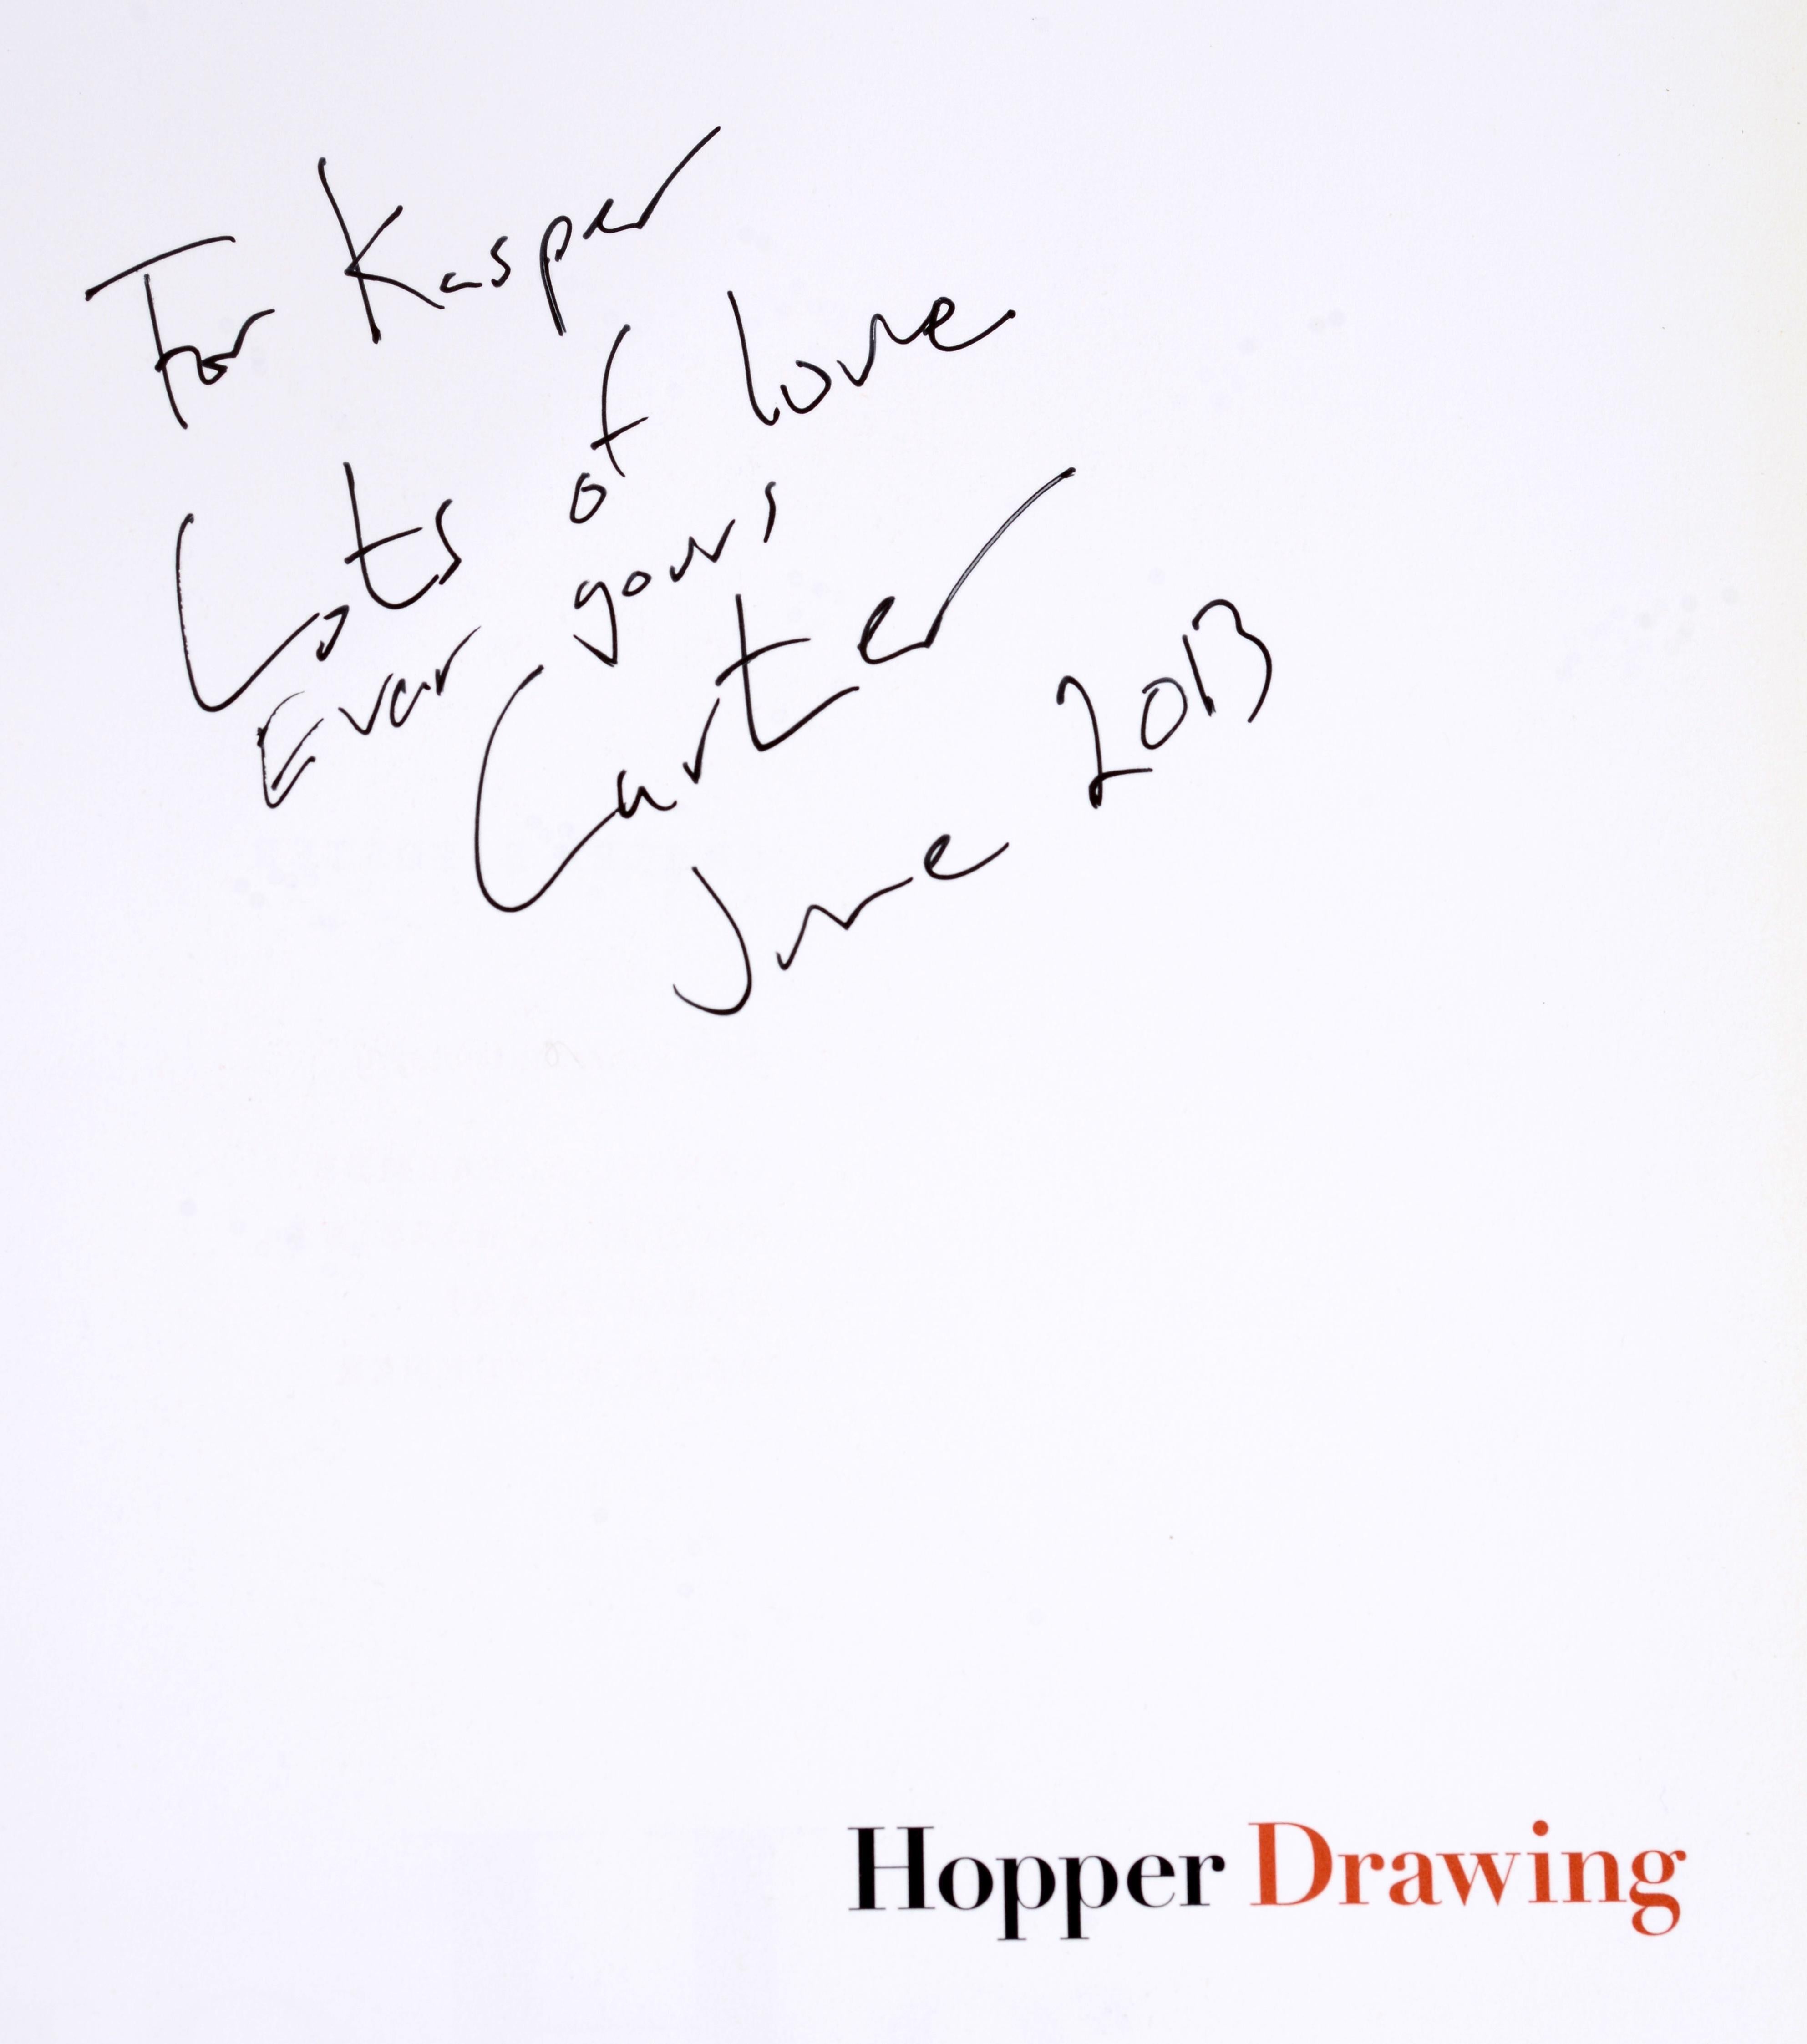 Hopper Drawing by Carter E Foster. 2013, Whitney Museum of American Art. 1st Ed hardcover with dust jacket. This monograph was prepared to accompany the exhibition at the Whitney Museum of American Art, from May 23 to October 6, 2013. The exhibition